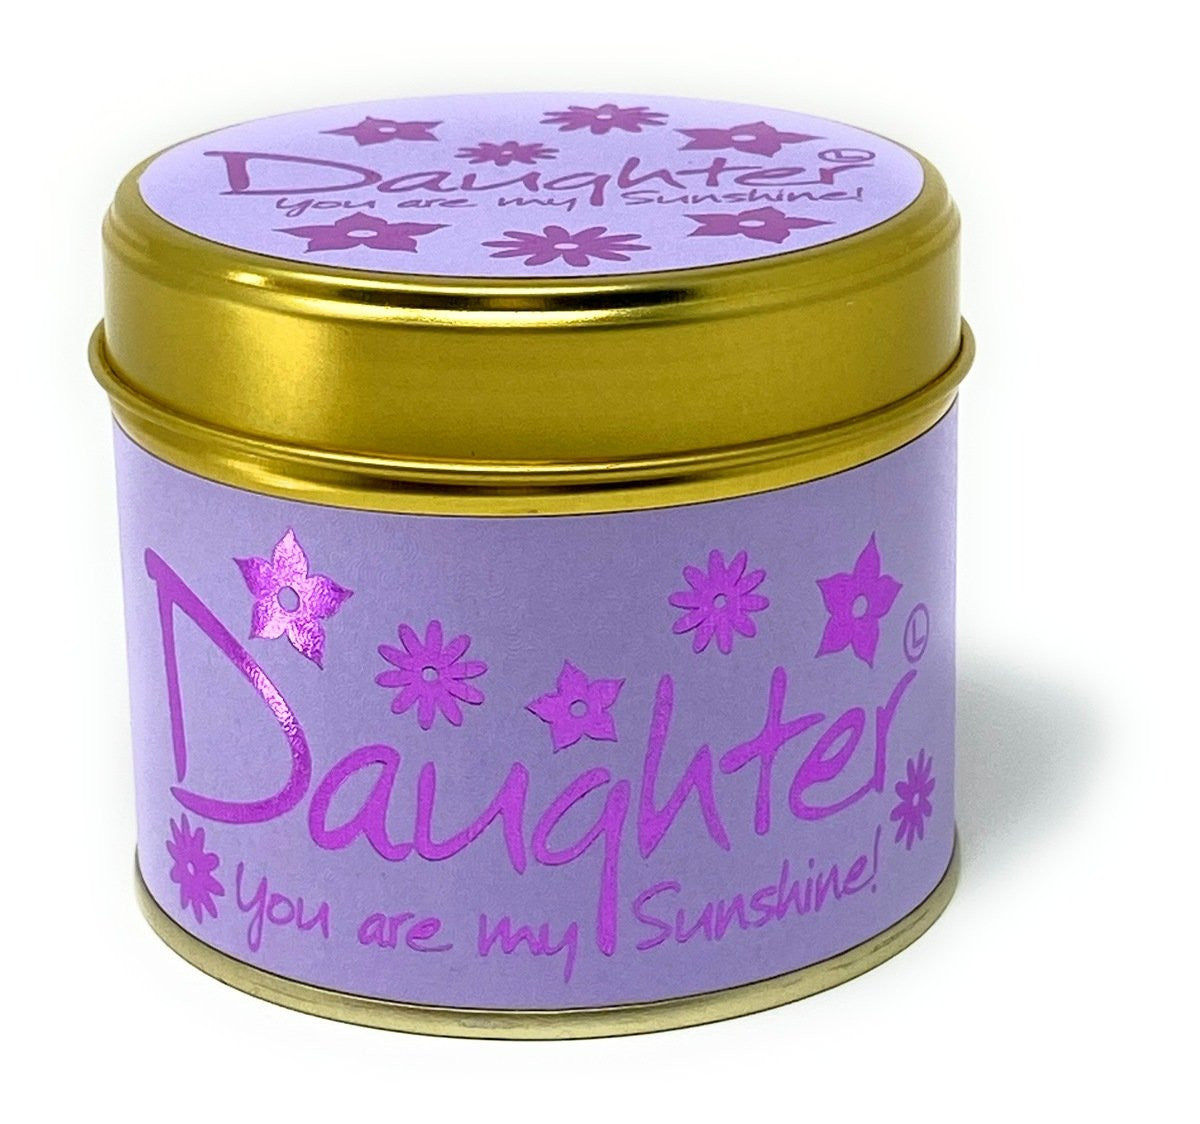 Daughter - You Are My Sunshine! Scented Candle from Lily-Flame. Handmade in England.